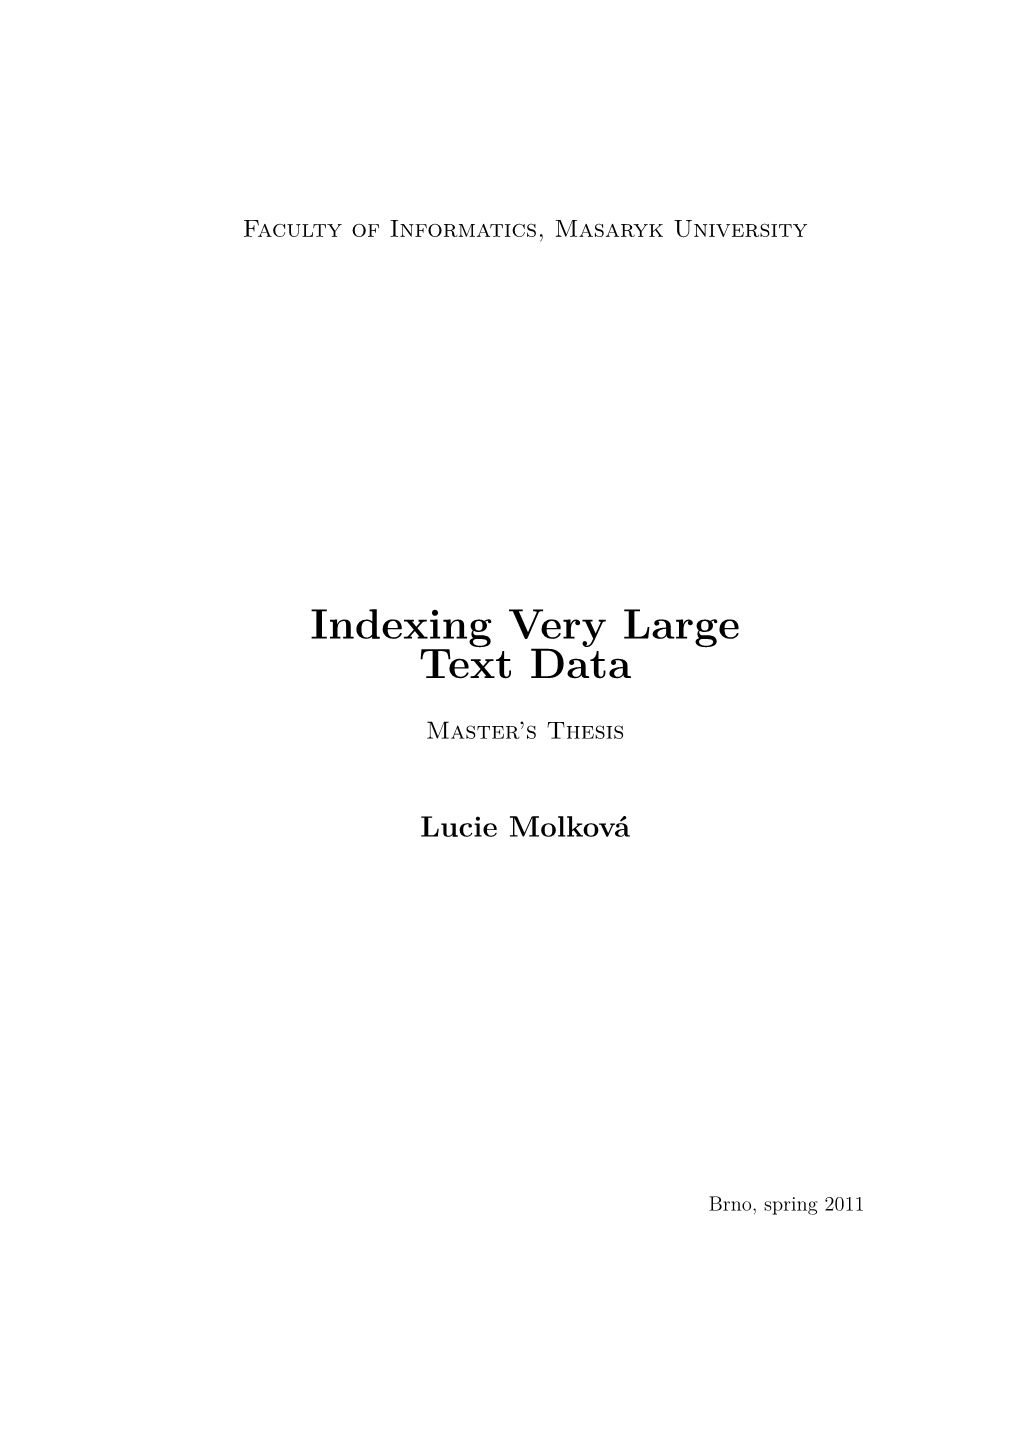 Indexing Very Large Text Data